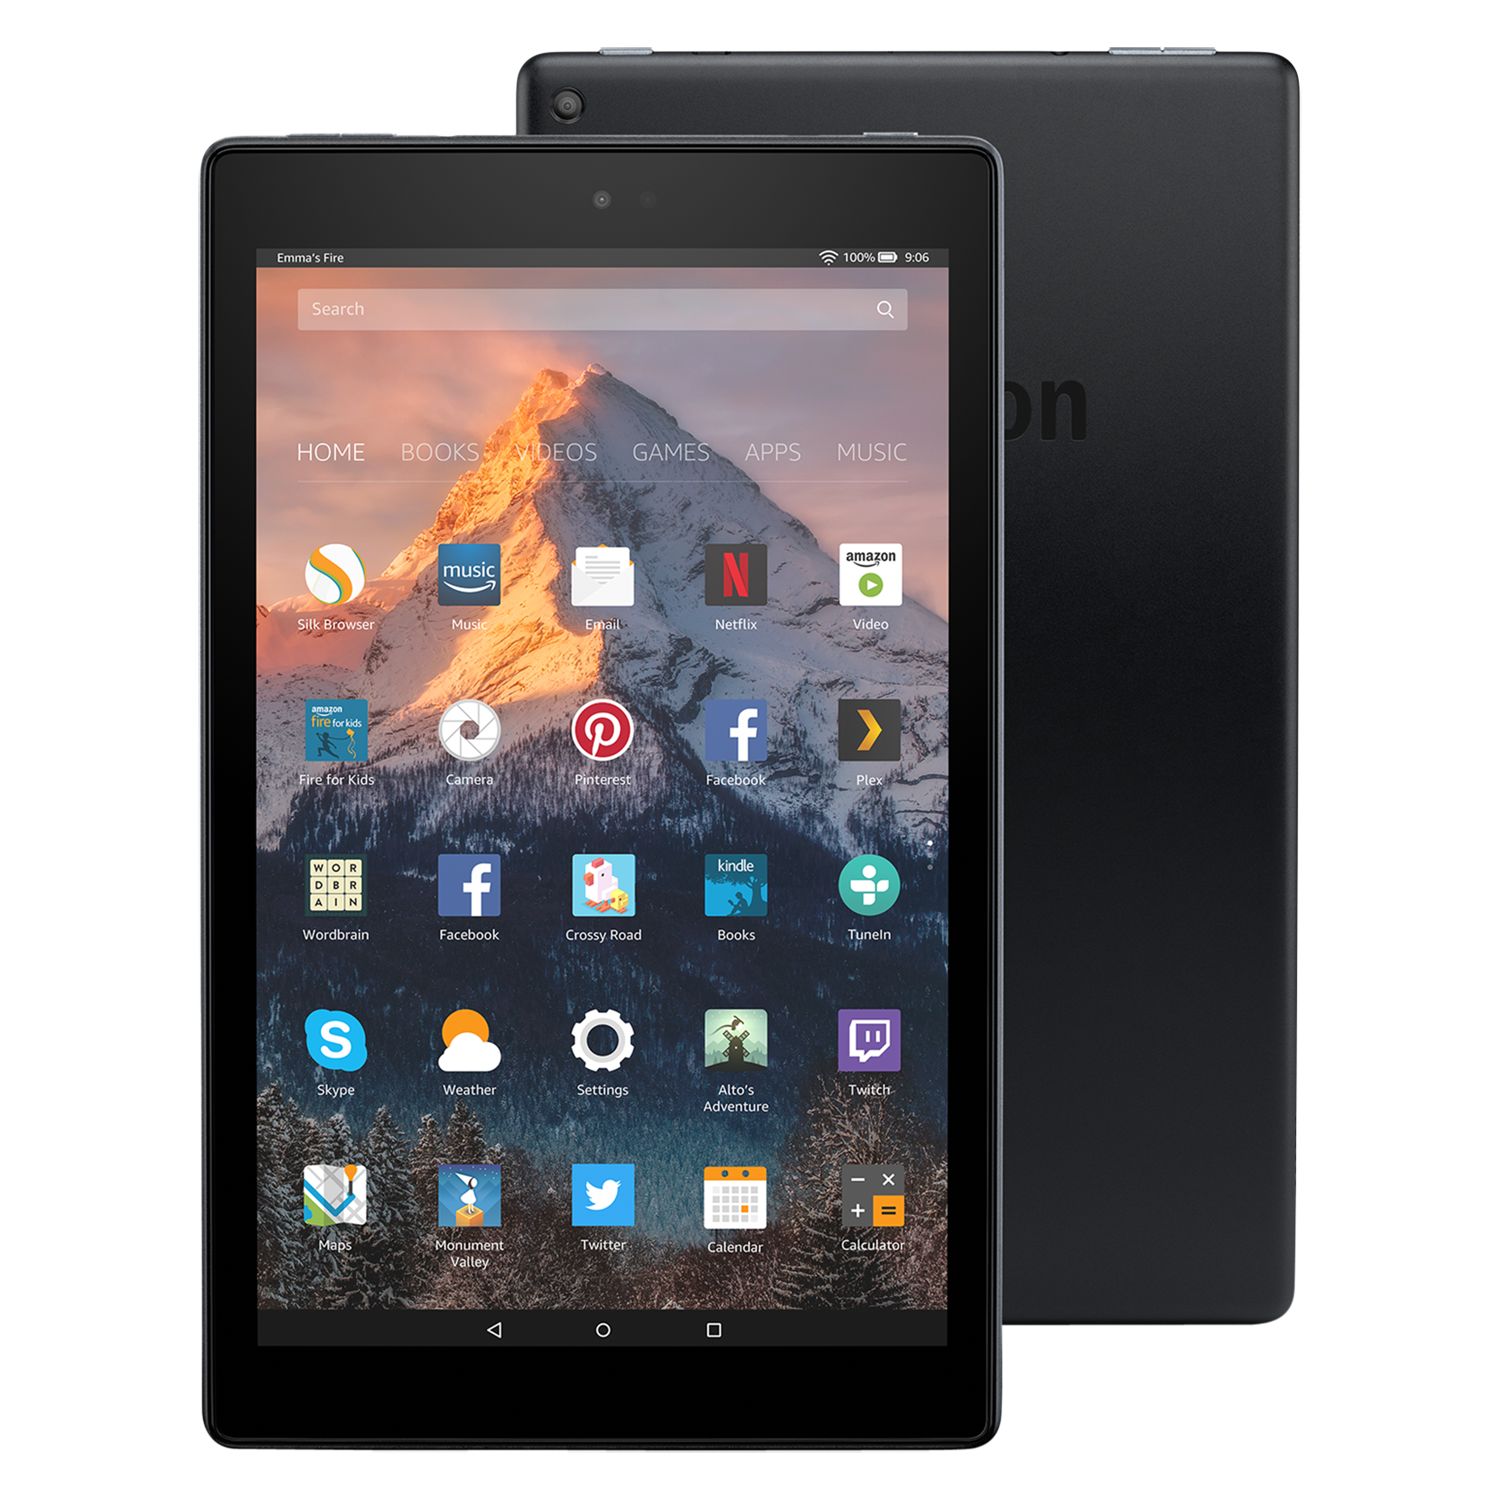 New Amazon Fire HD 10 Tablet with Alexa Hands-Free, Quad-core, Fire OS, 10.1" Full HD, Wi-Fi, 32GB, with Special Offers